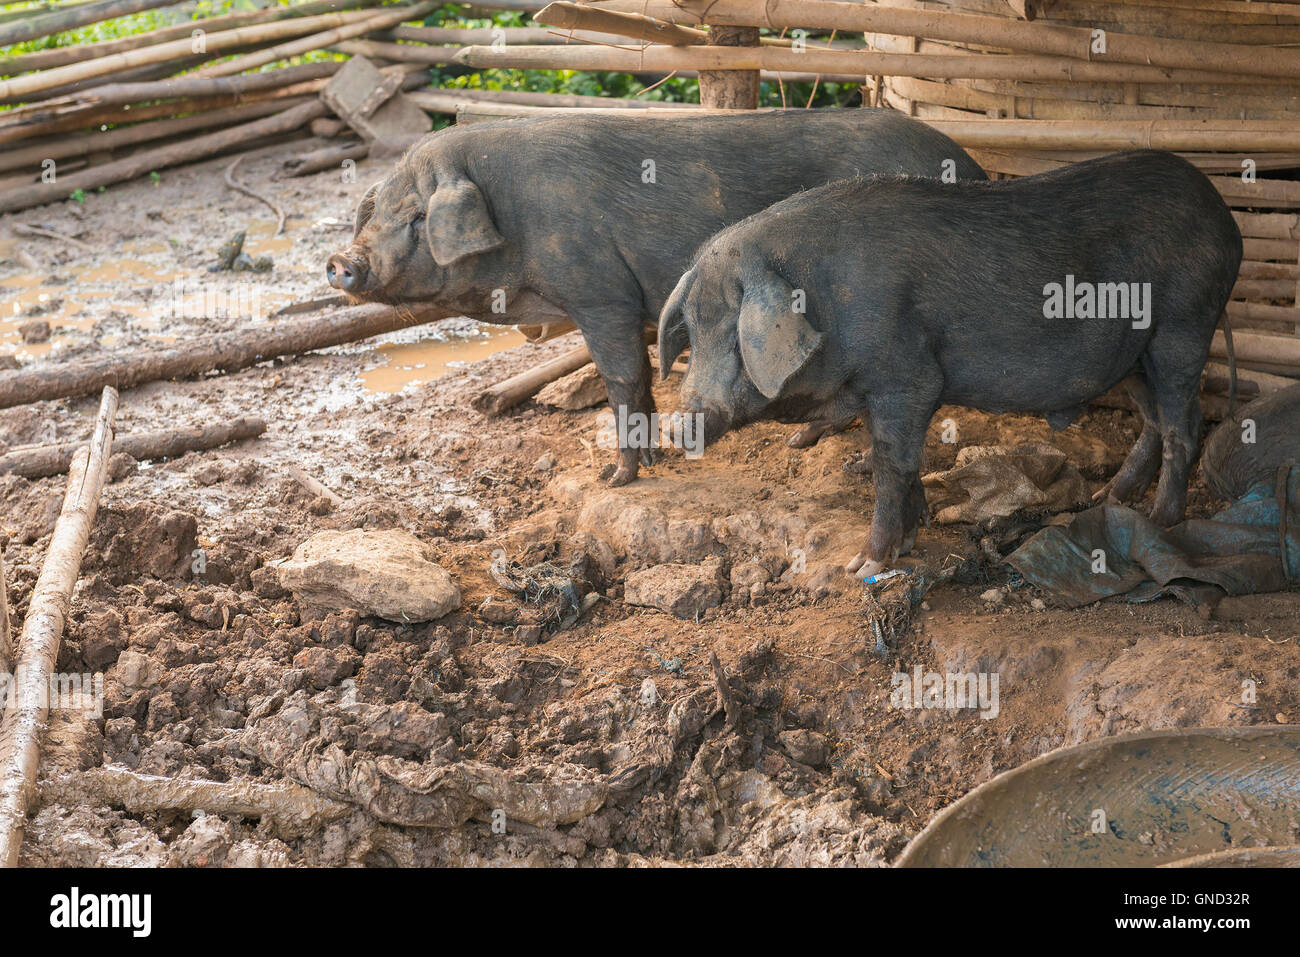 Black pigs in the pen. Stock Photo